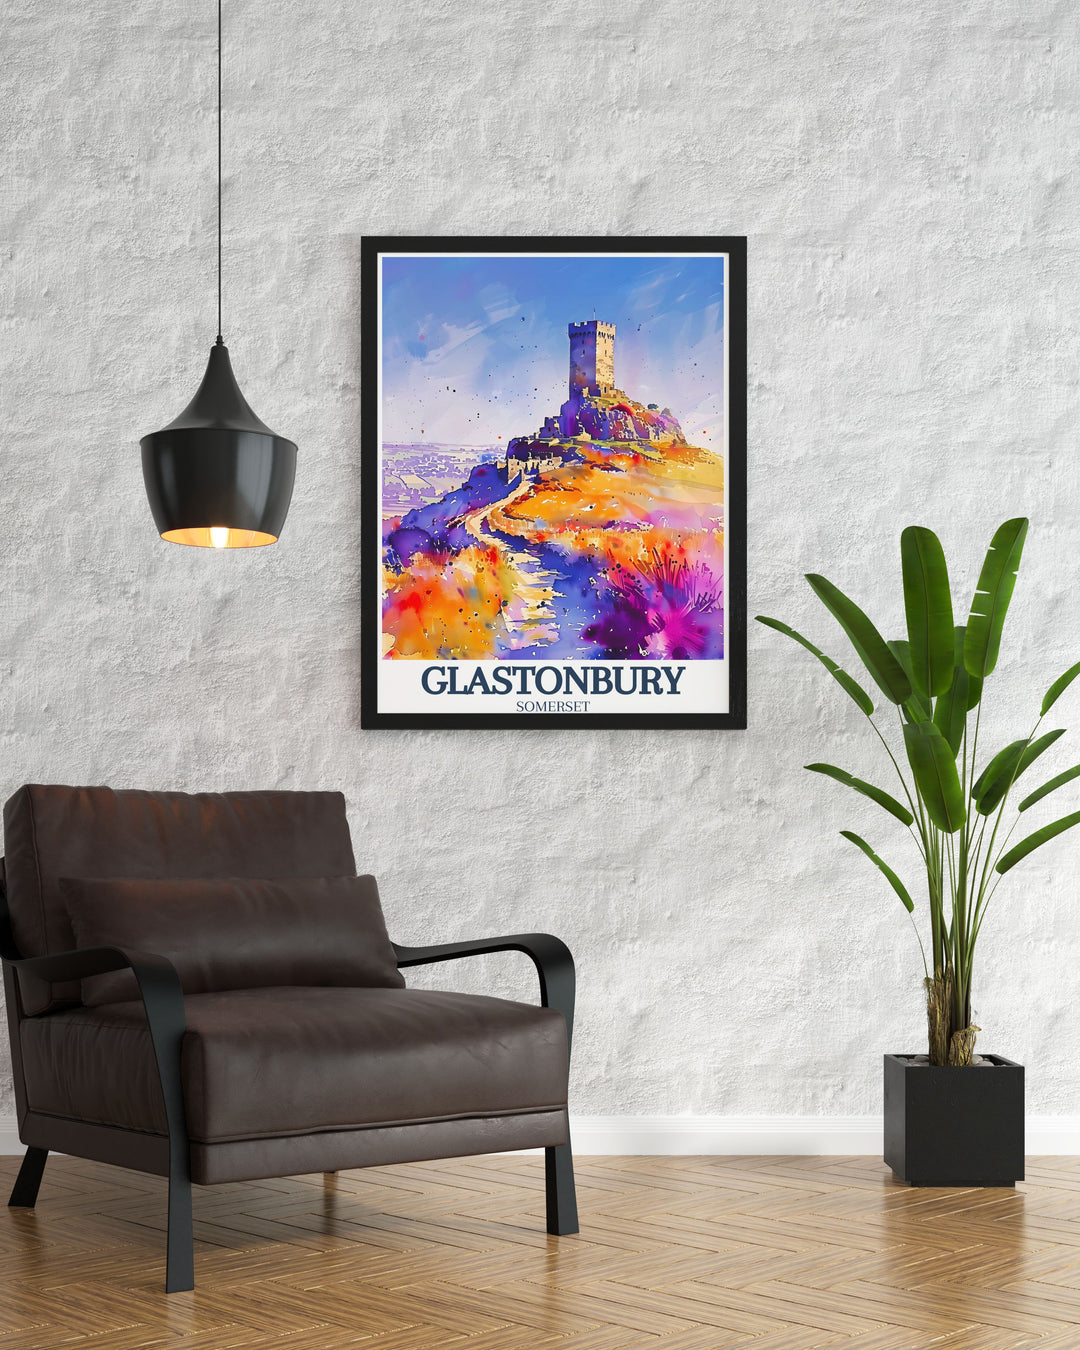 Exquisite Glastonbury Tor artwork capturing St. Michaels tower and Somerset levels a must have for lovers of UK art and those looking for distinctive Glastonbury gifts perfect for enhancing any home decor with beautiful England wall art.